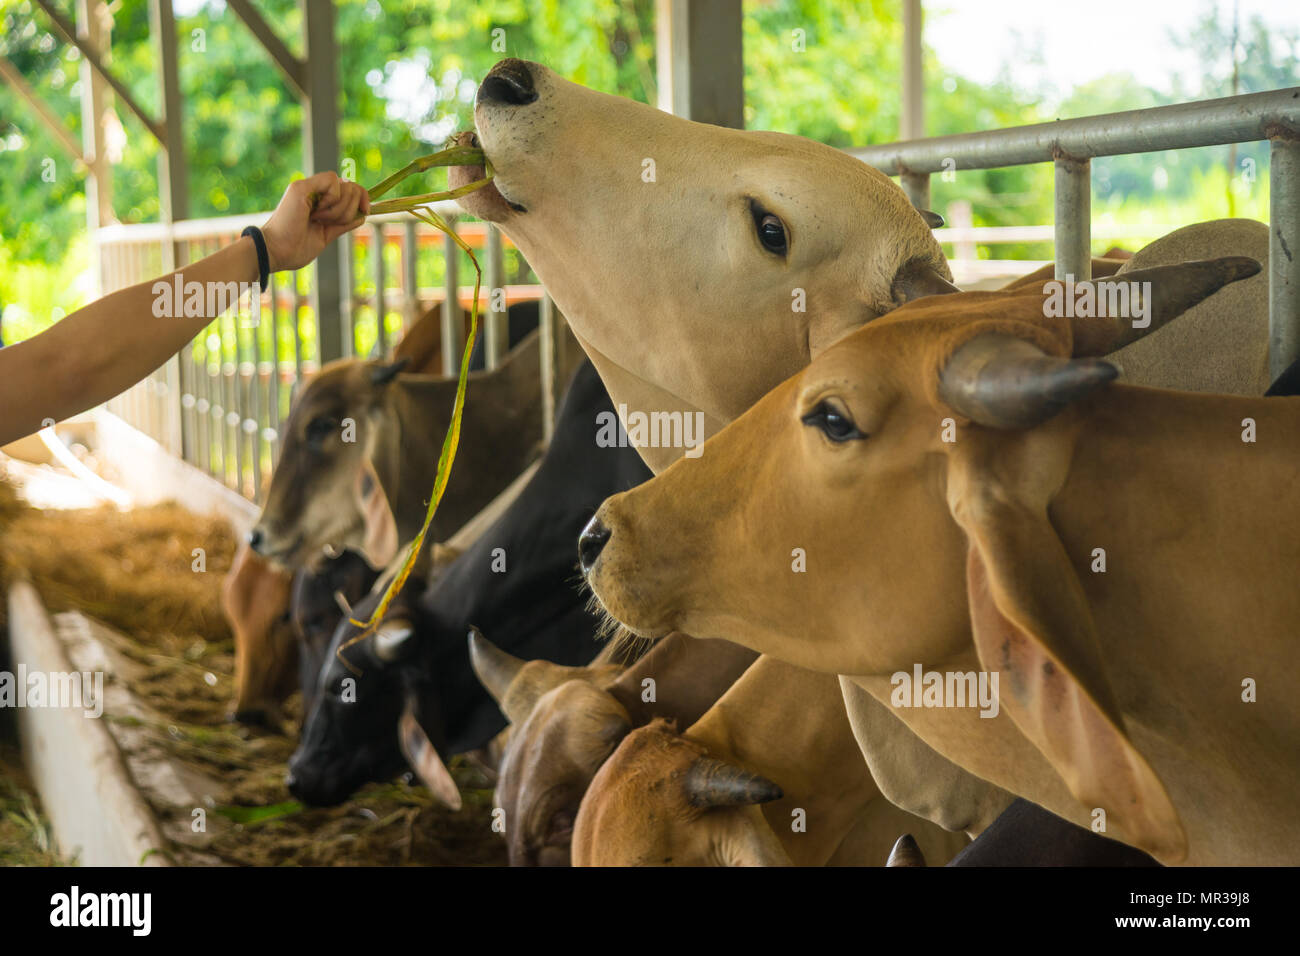 Un-identified hand feeding grass to farm cows in cow pen in rural of Thailand Stock Photo